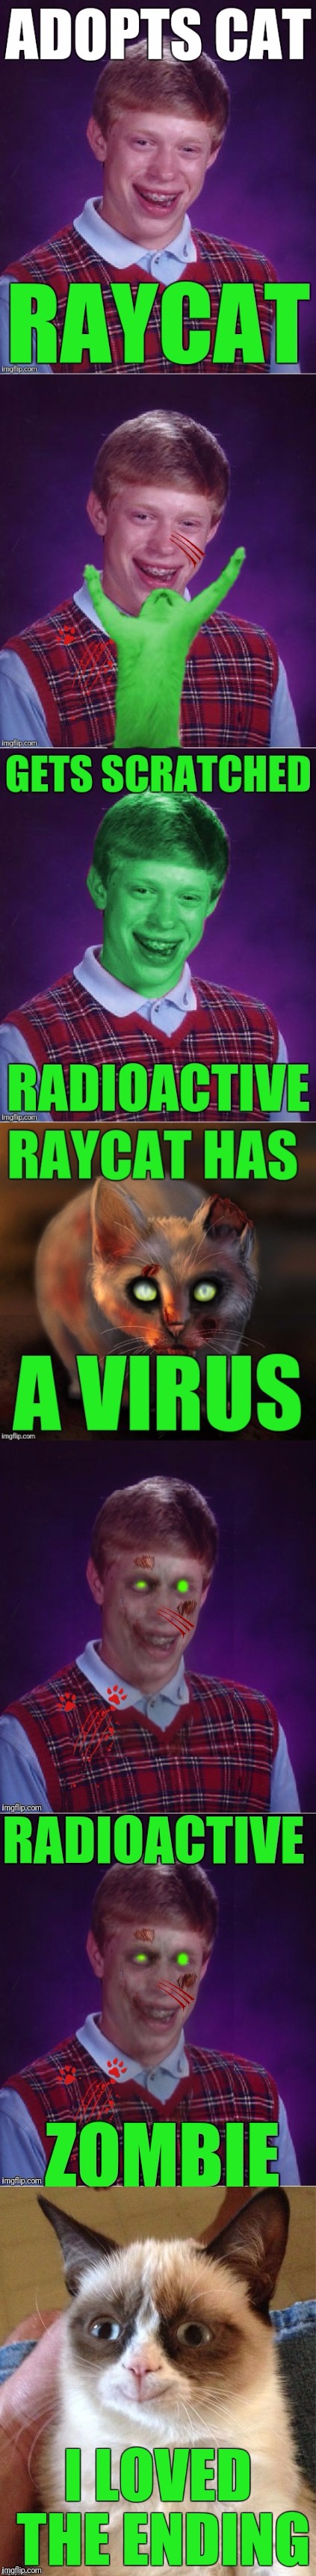 Radiation/Zombie Week - A NexusDarkshade & ValerieLyn Event.  Bad Luck Brian should stay away from cats...  | image tagged in memes,radiation zombie week,raycat,radioactive zombie bad luck brian,happy grumpy cat,nexusdarkshade valerielyn | made w/ Imgflip meme maker